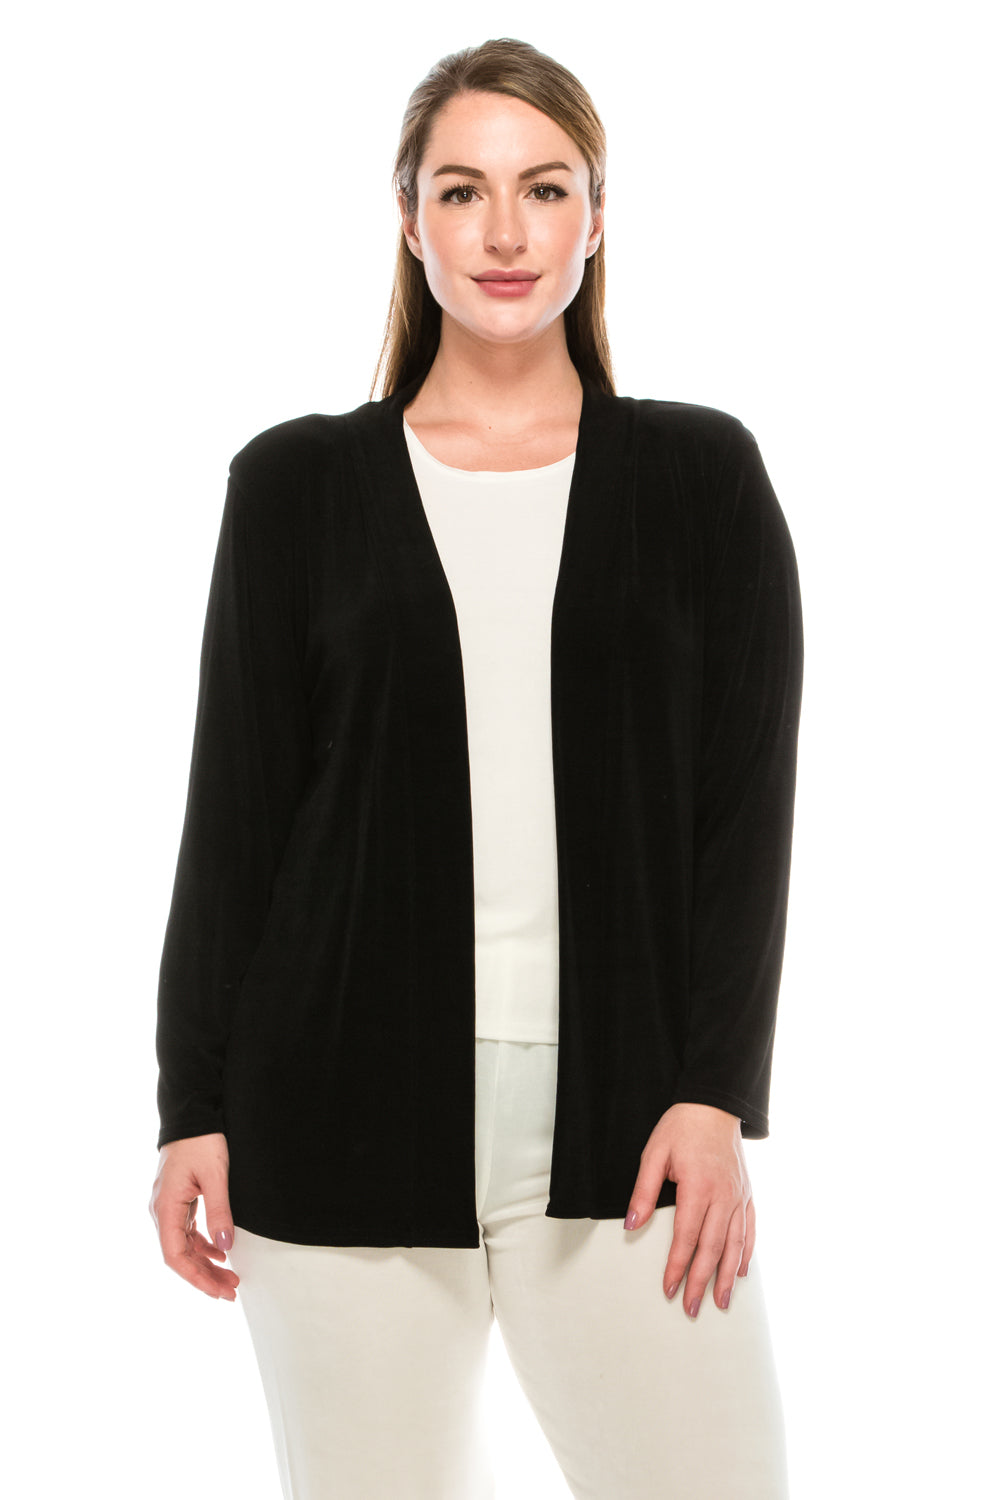 Jostar Women's Acetate Drape Jacket Long Sleeve,400AY-L,Made in  USA.Everyday wrinkle resistant, travel friendly. Comfortable and trendy. –  Jostar Online